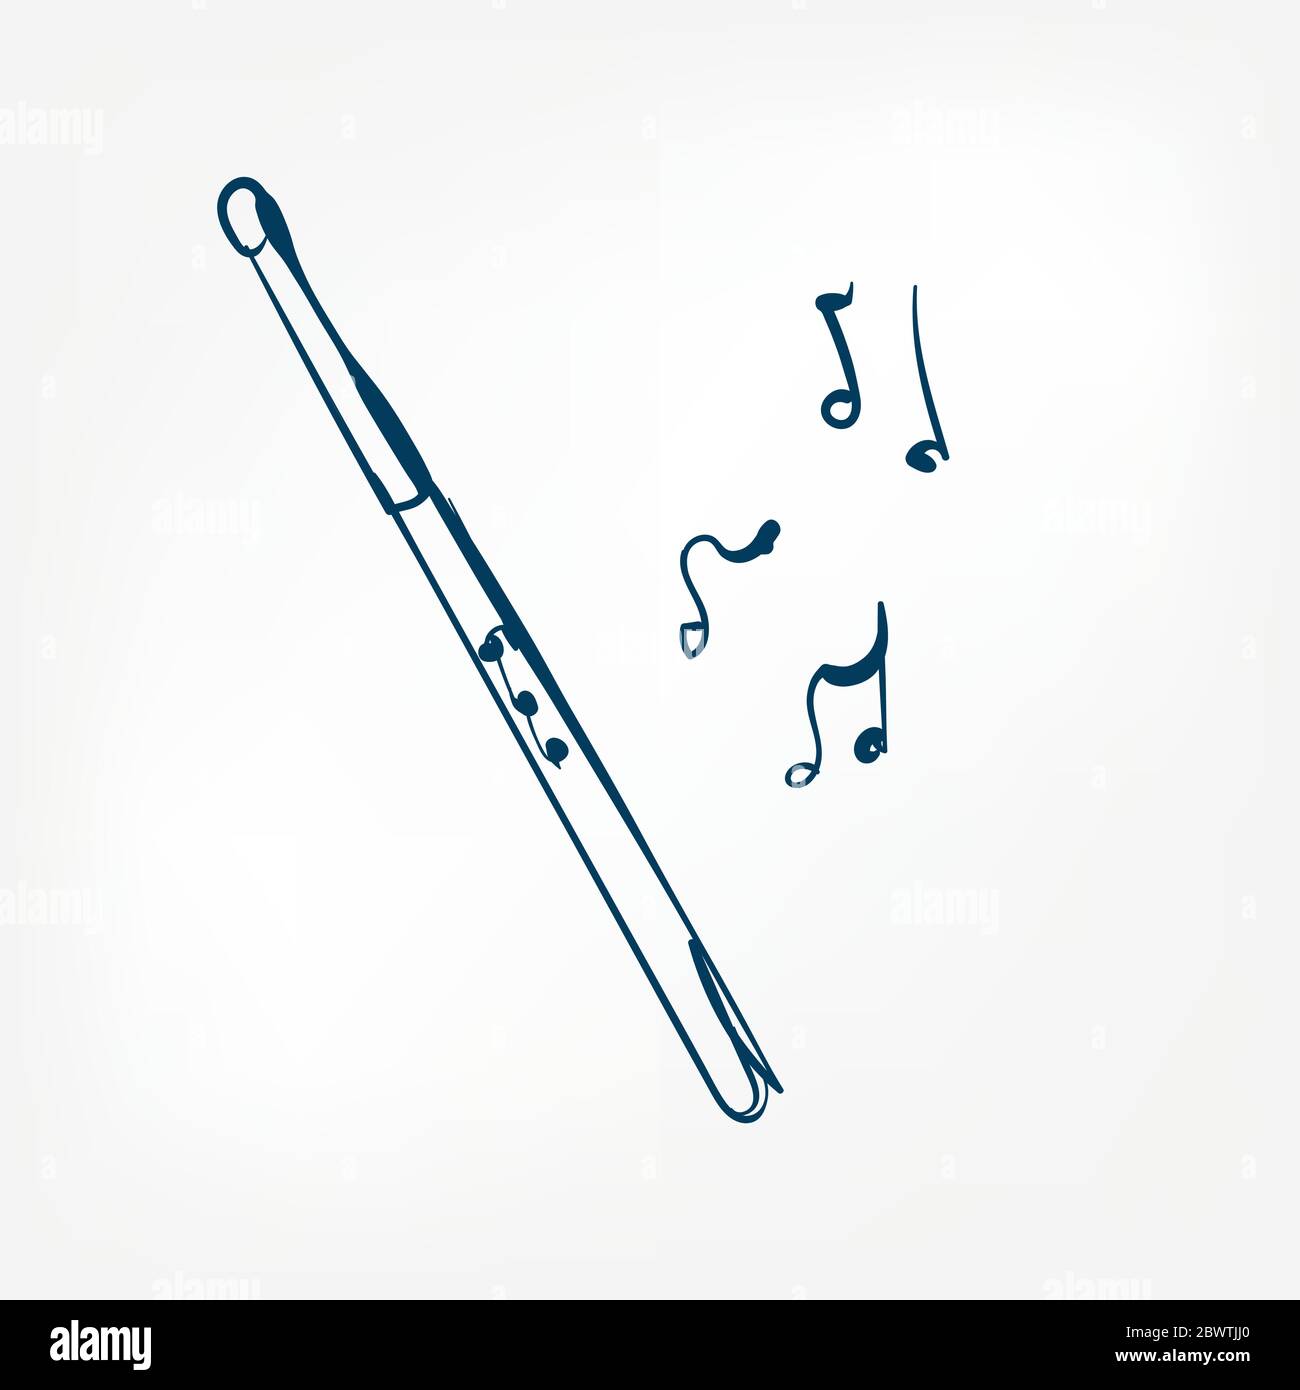 Flute  Free Images at Clkercom  vector clip art online royalty free   public domain